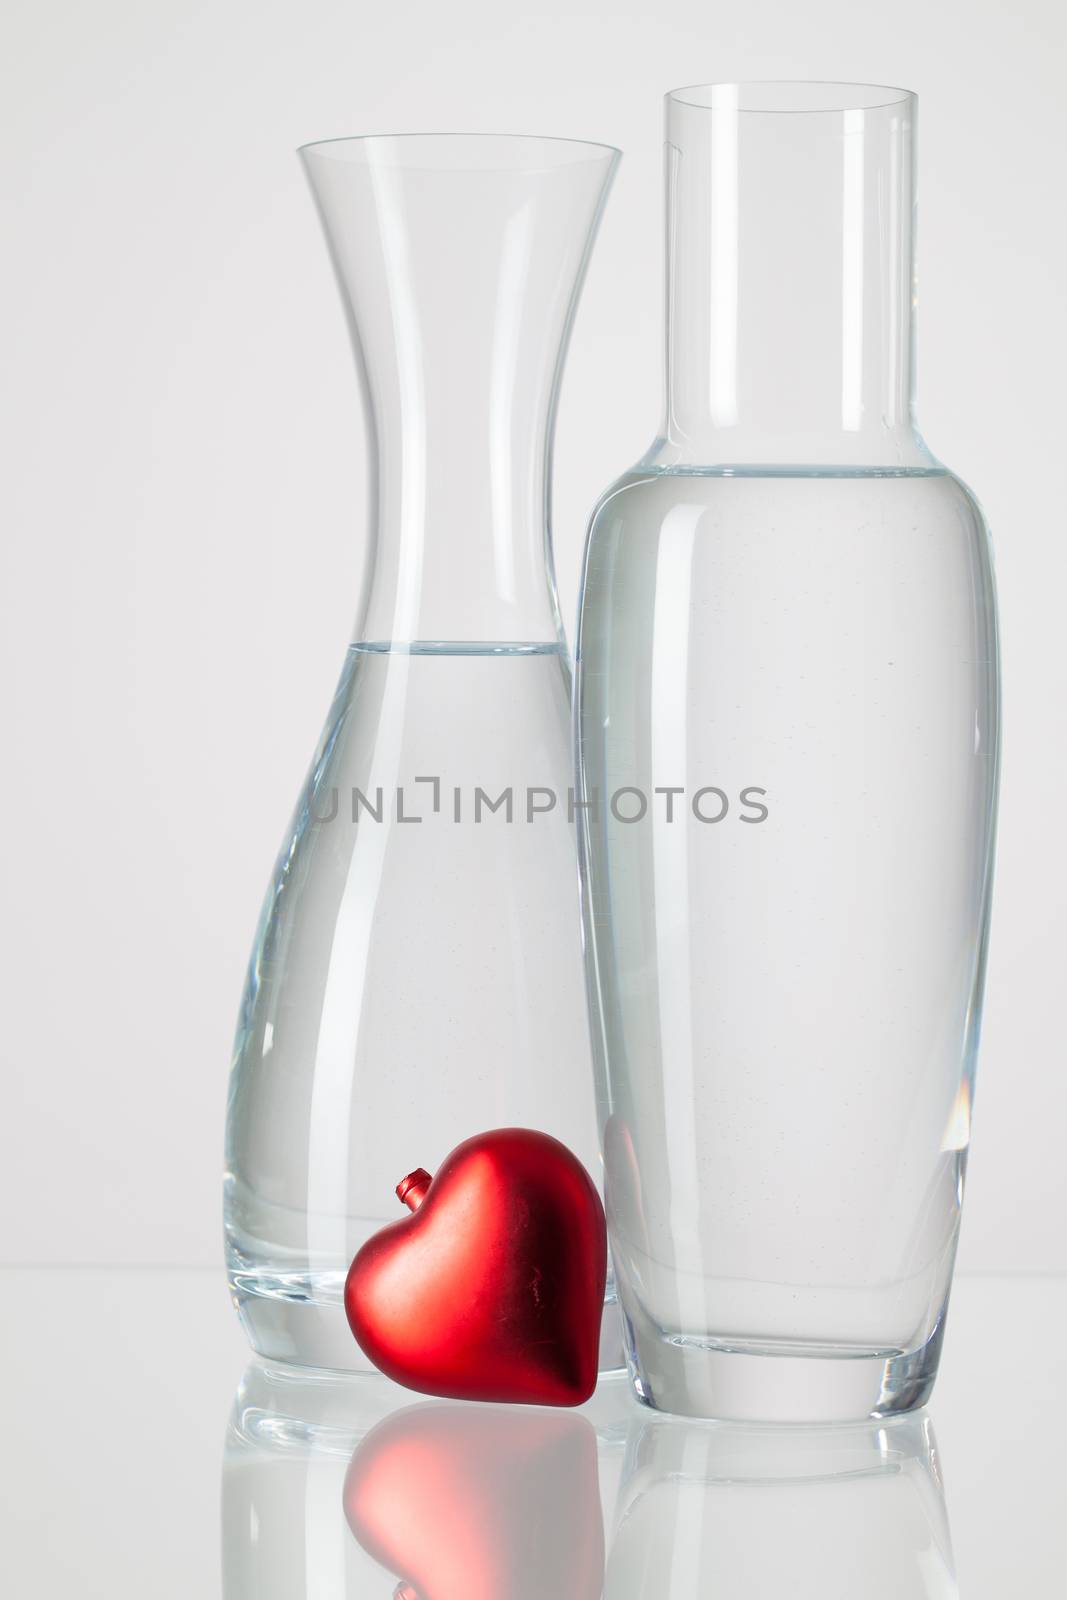 Two vases with clean water and red heart   by CaptureLight